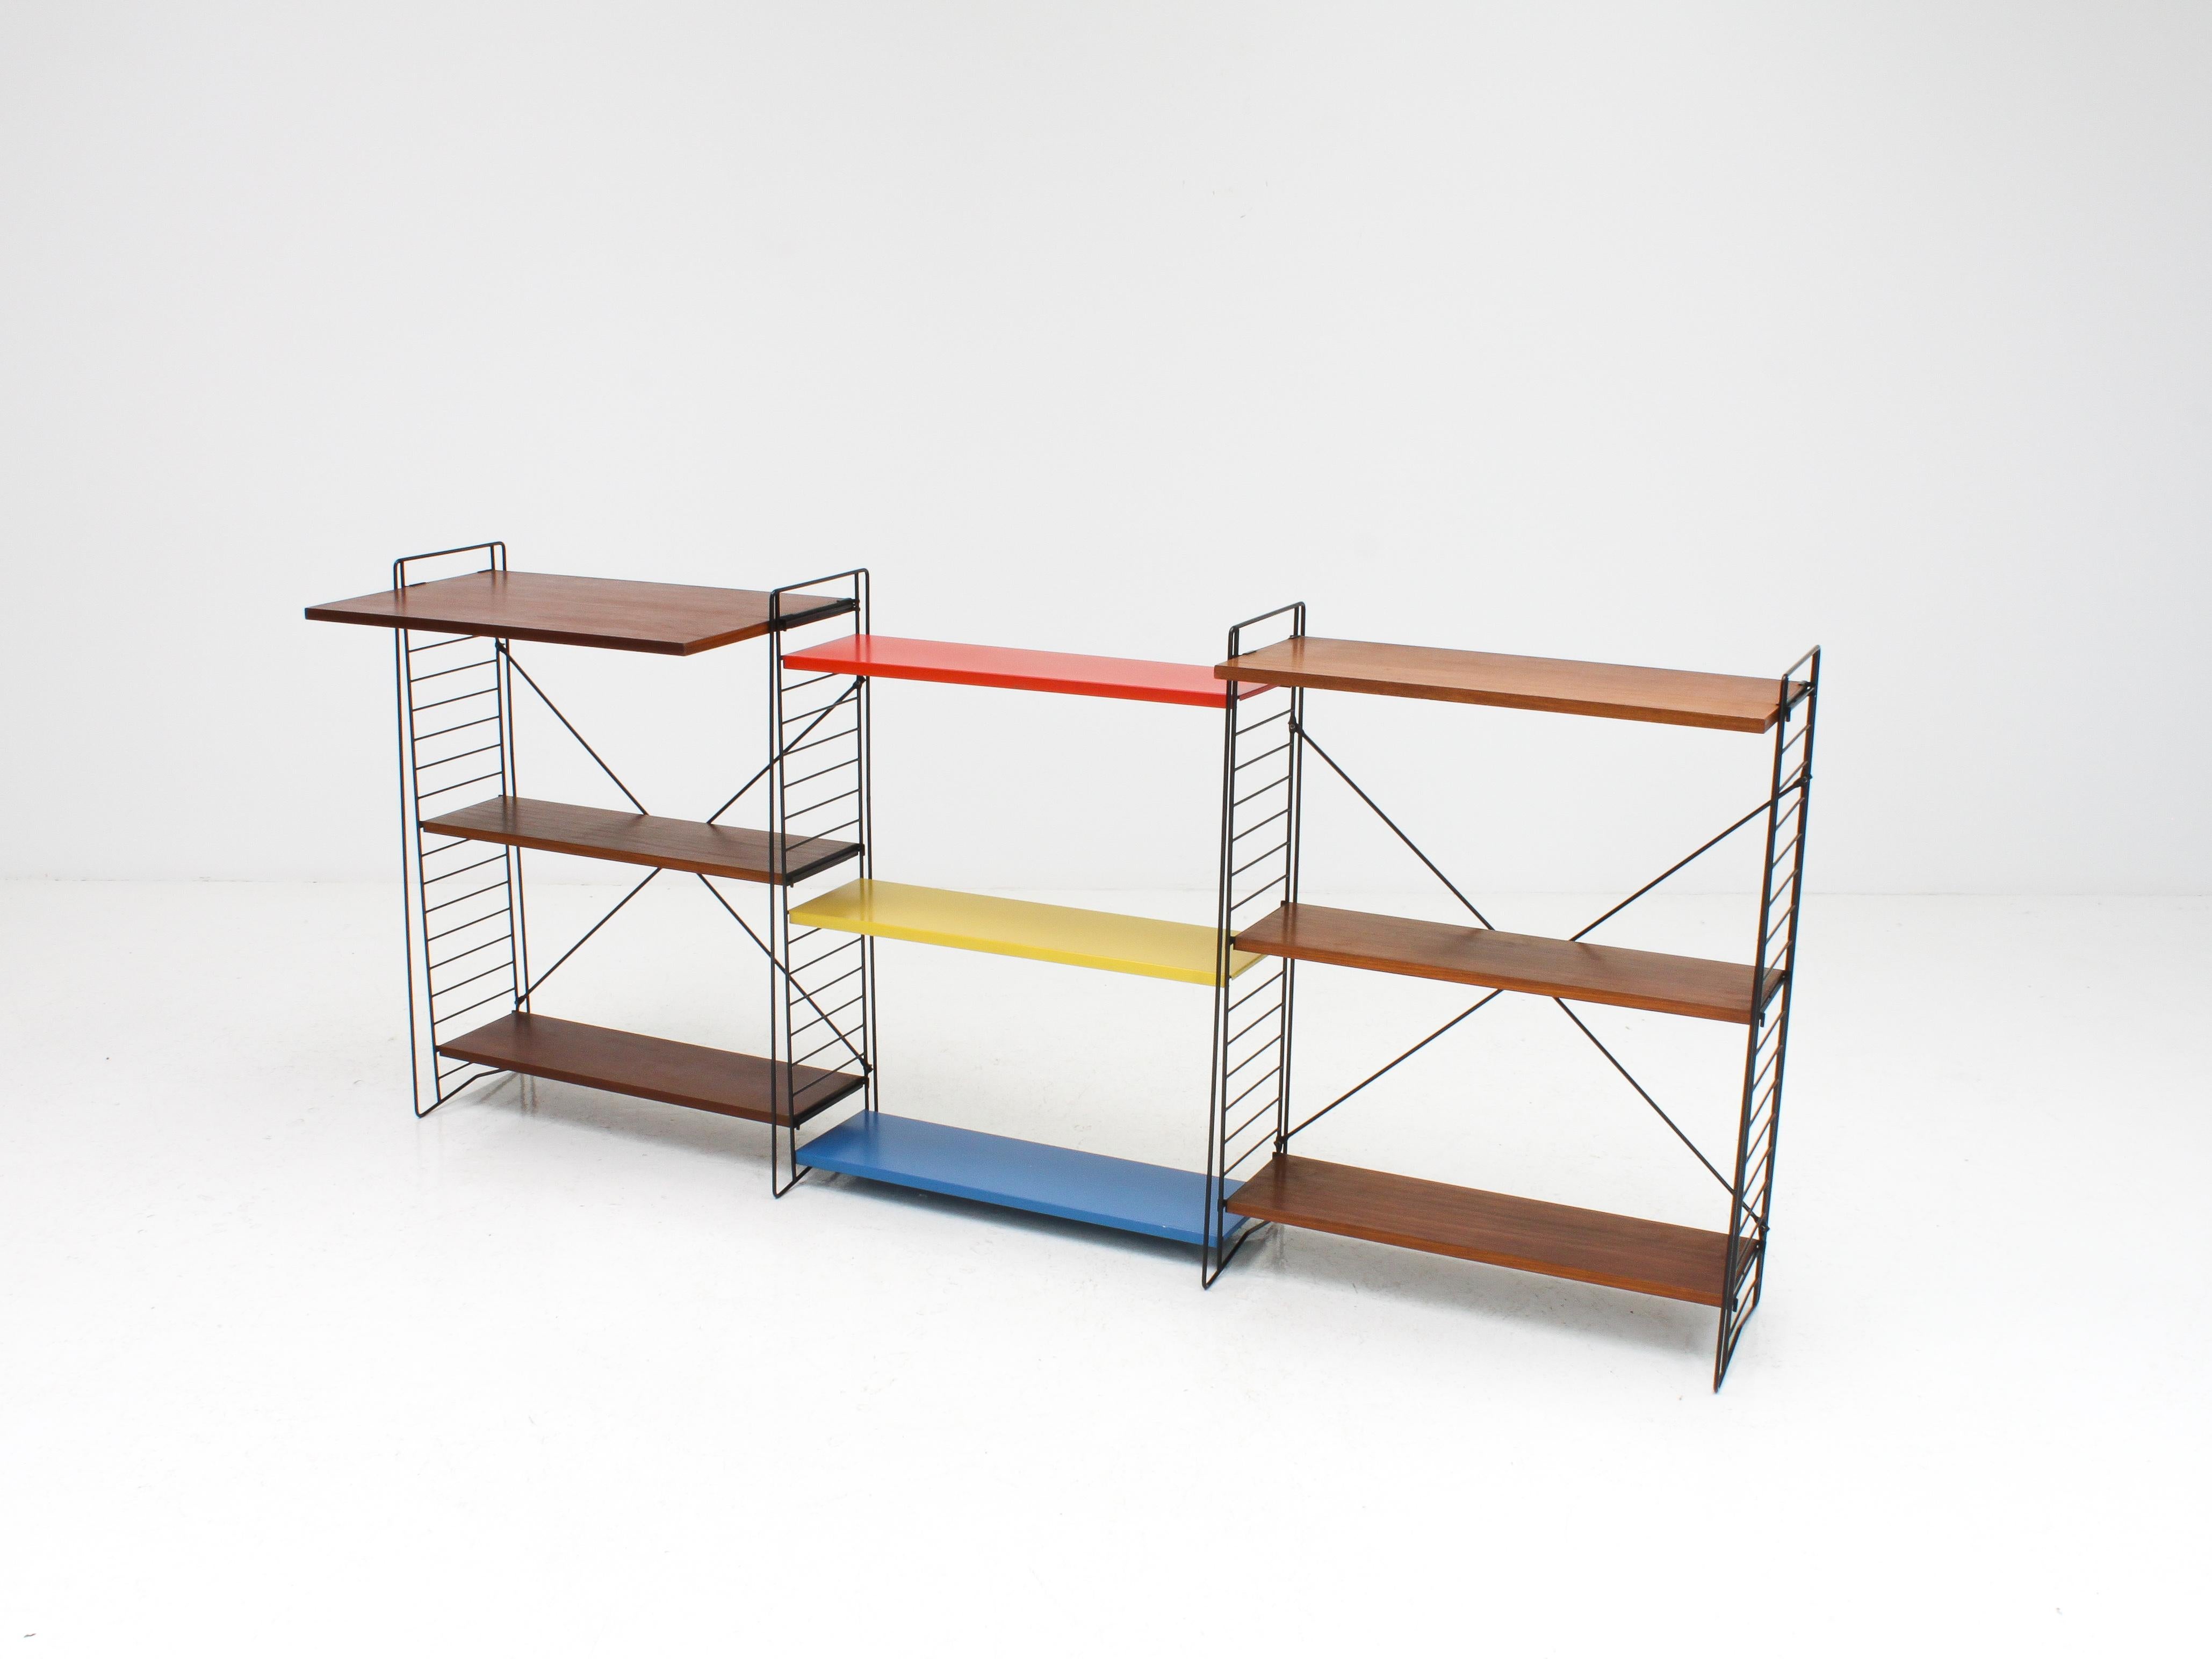 A set of vintage Tomado freestanding shelving / book racks with rare desk shelf - designed mid-1950s by A. Dekker and manufactured in the Netherlands.

Powder-coated frame and adjustable steel shelves. This design looks amazing in any room and